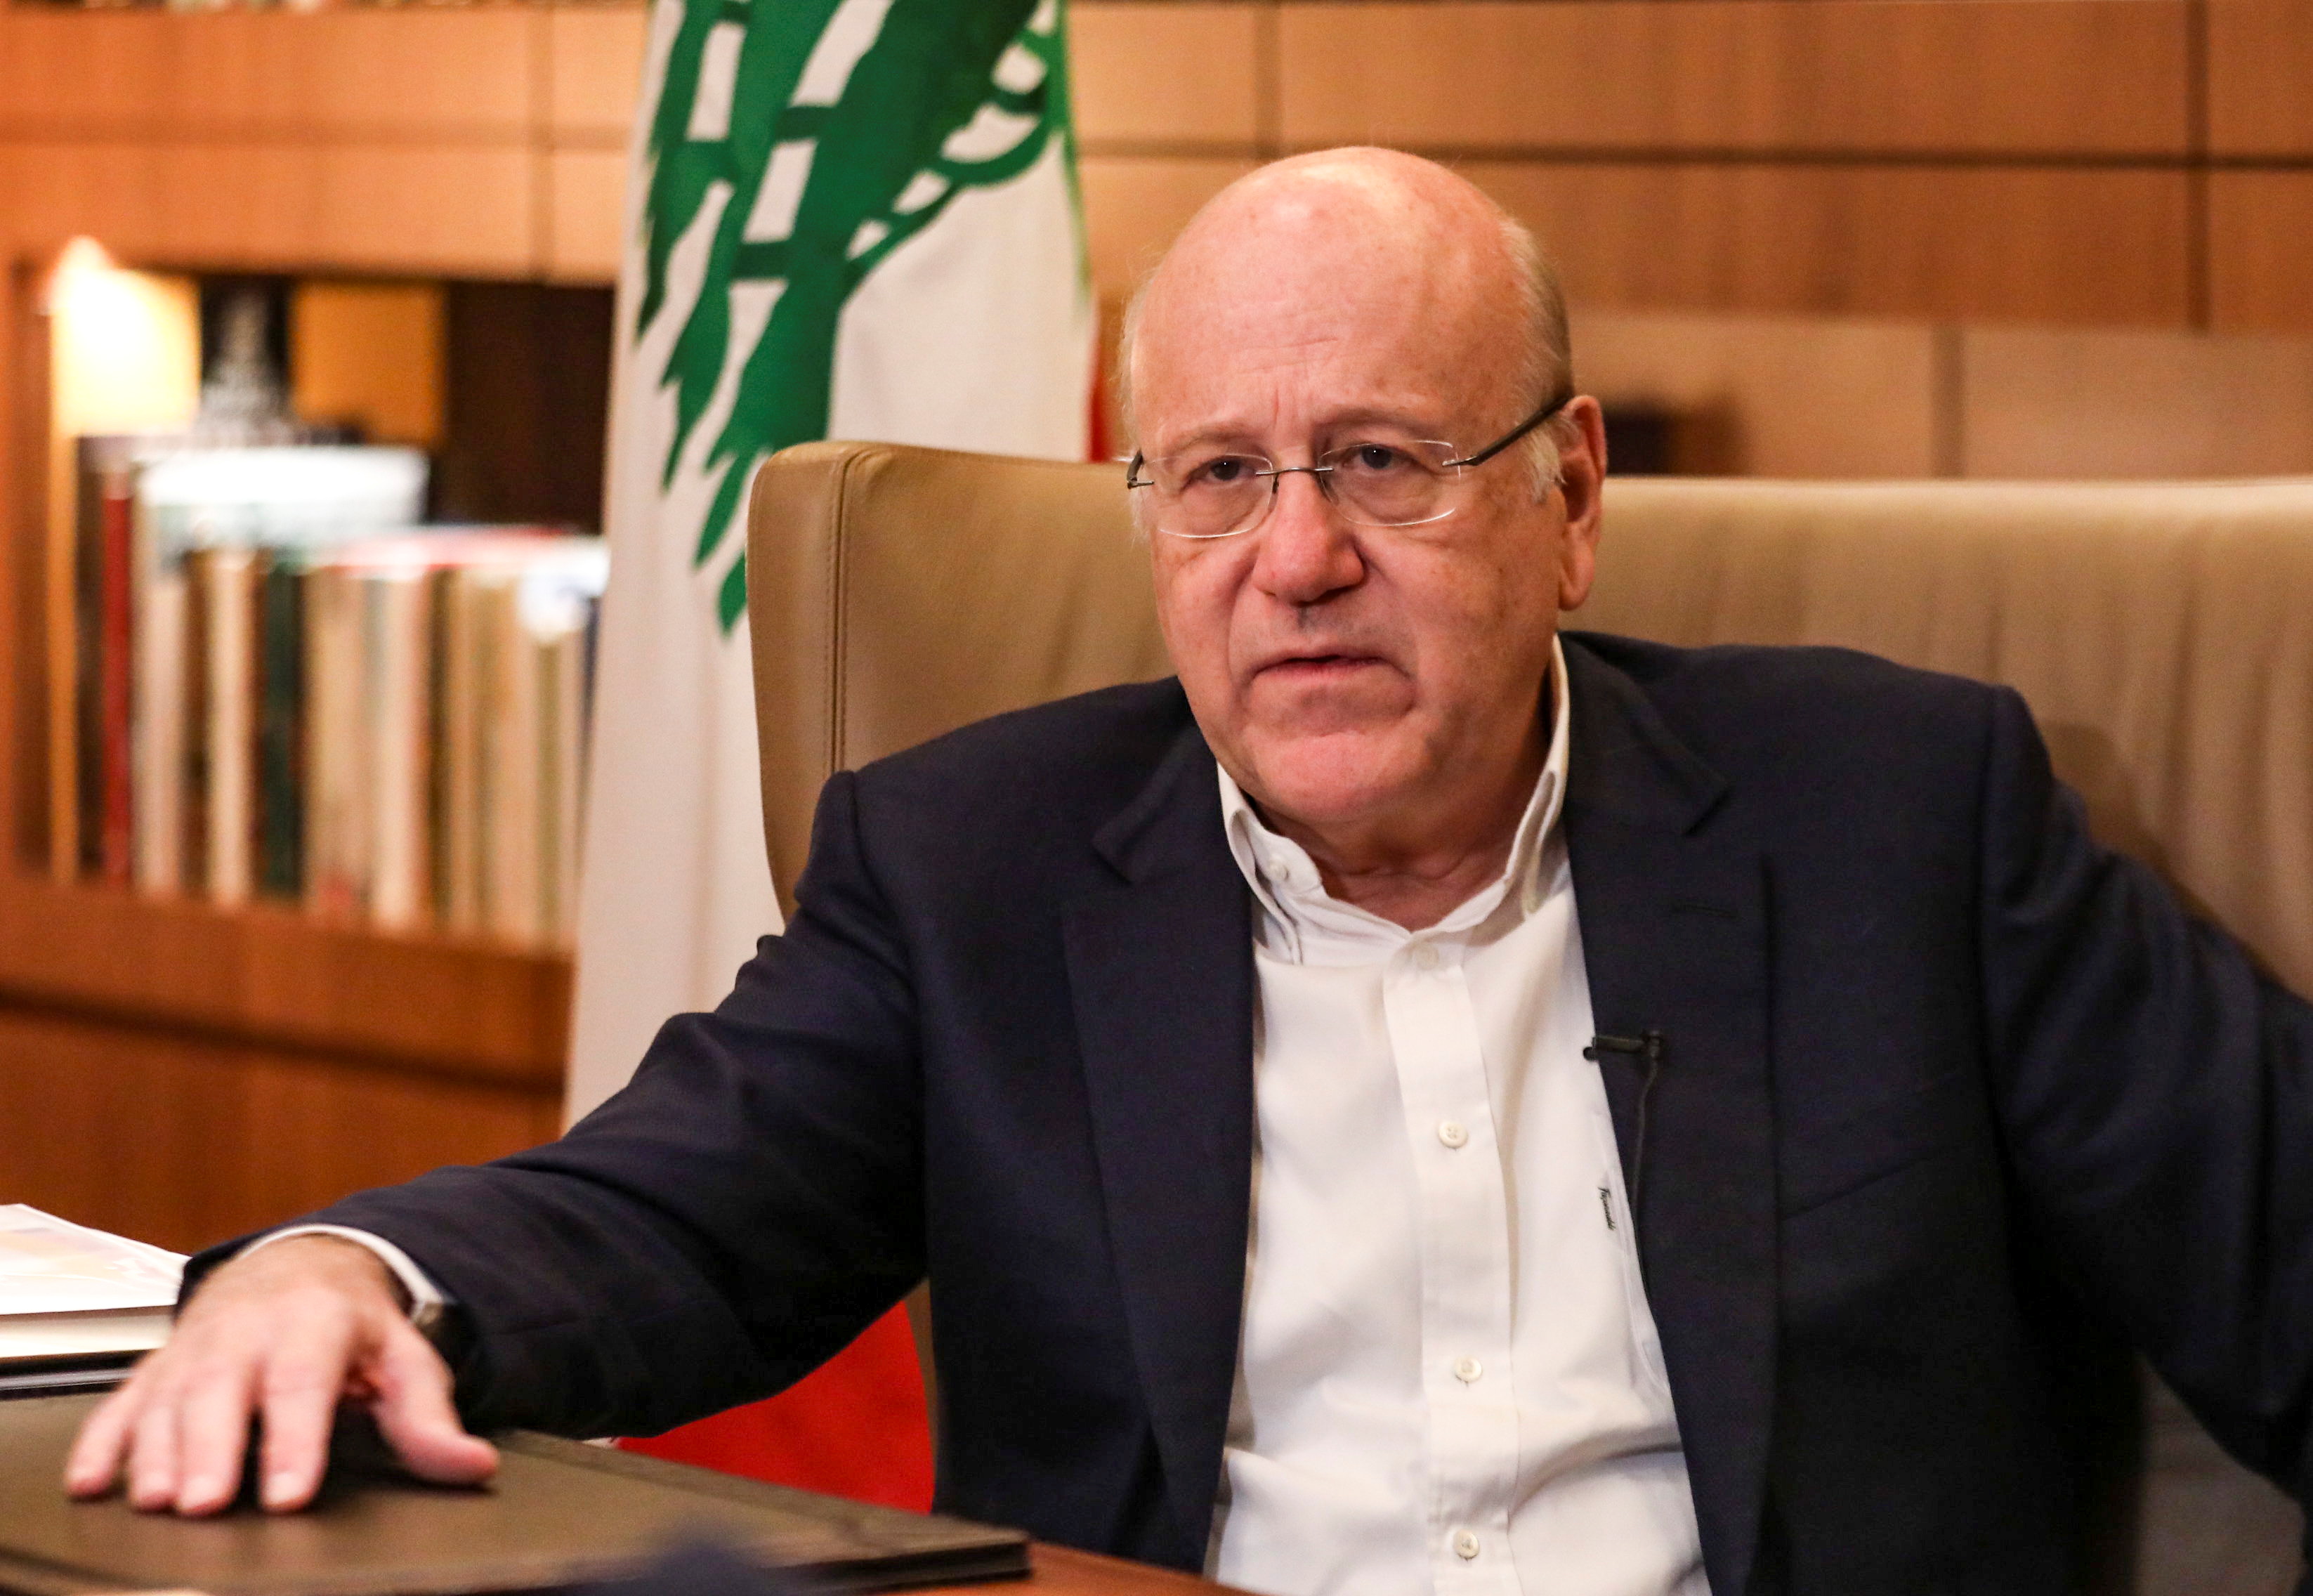 Lebanese Prime Minister Najib Mikati speaks during an interview with Reuters at the government palace in Beirut